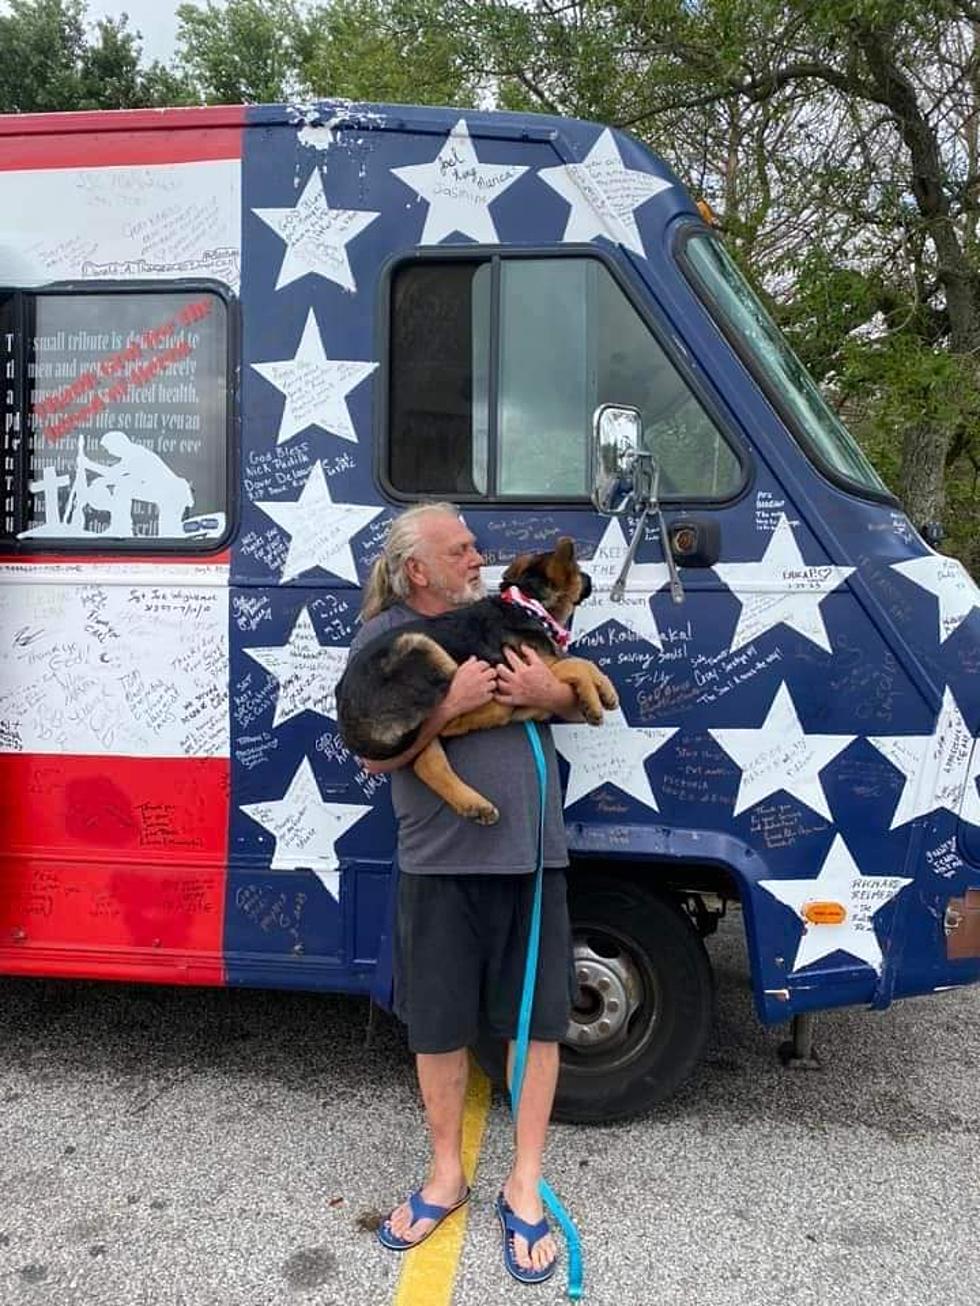 Flag Van Driving Across the Country Makes Stop in Wichita Falls, Texas